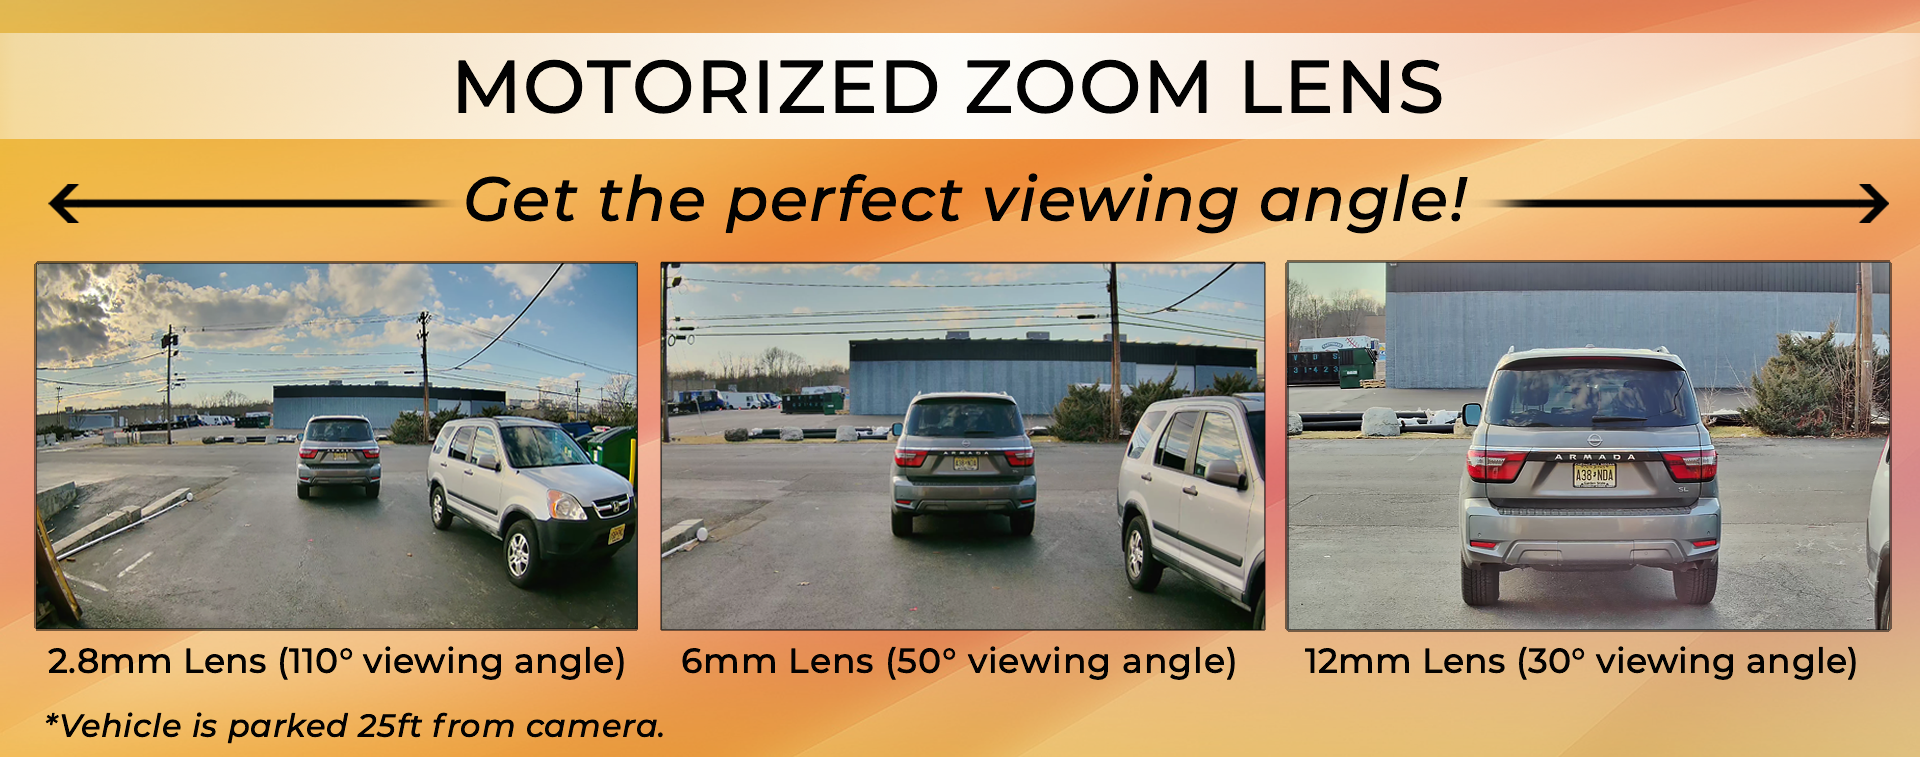 Motorized Zoom Lens Features